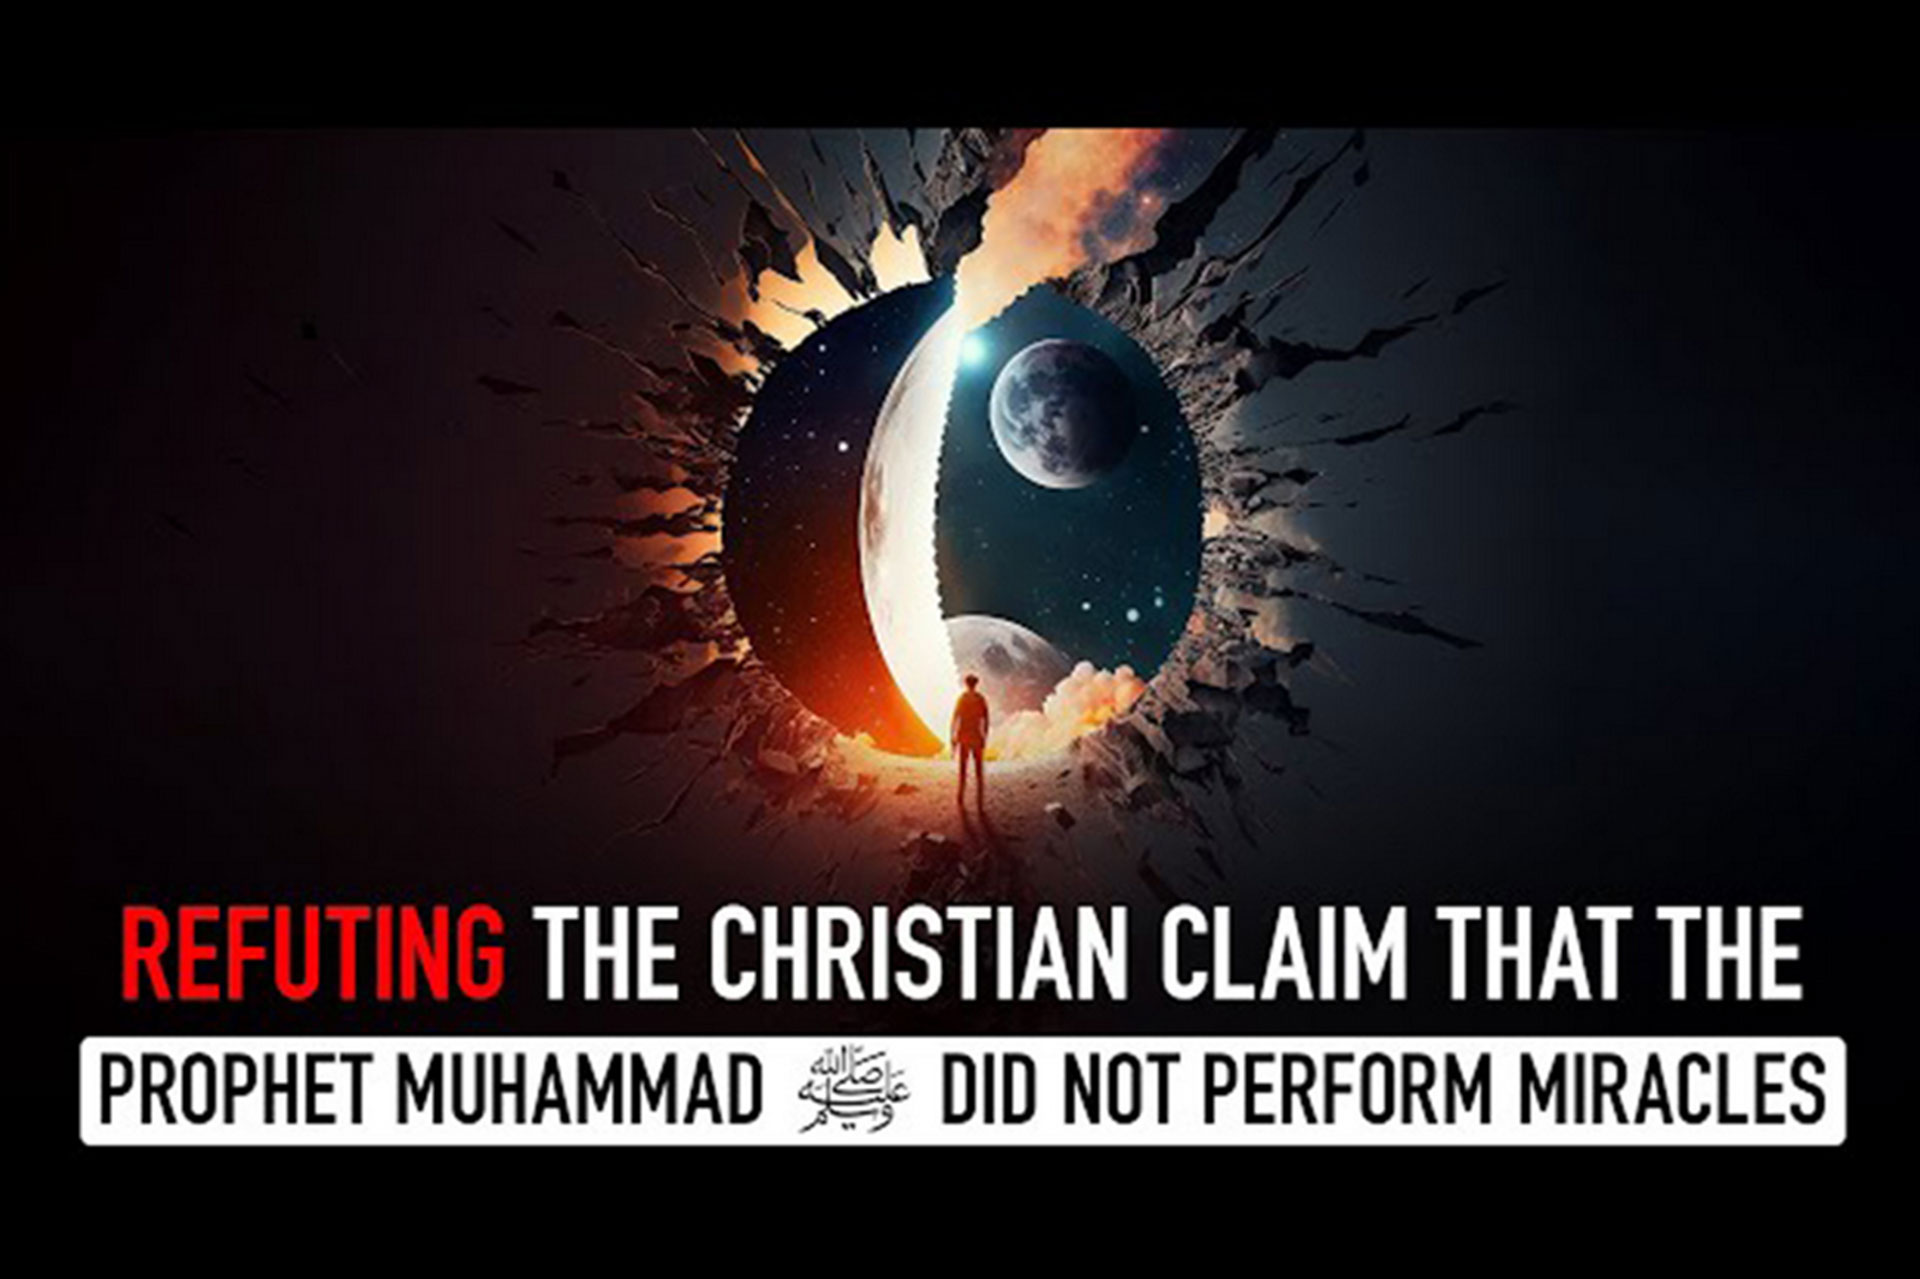 Refuting the Christian Claim the Prophet Muhammad ﷺ Did No Miracles